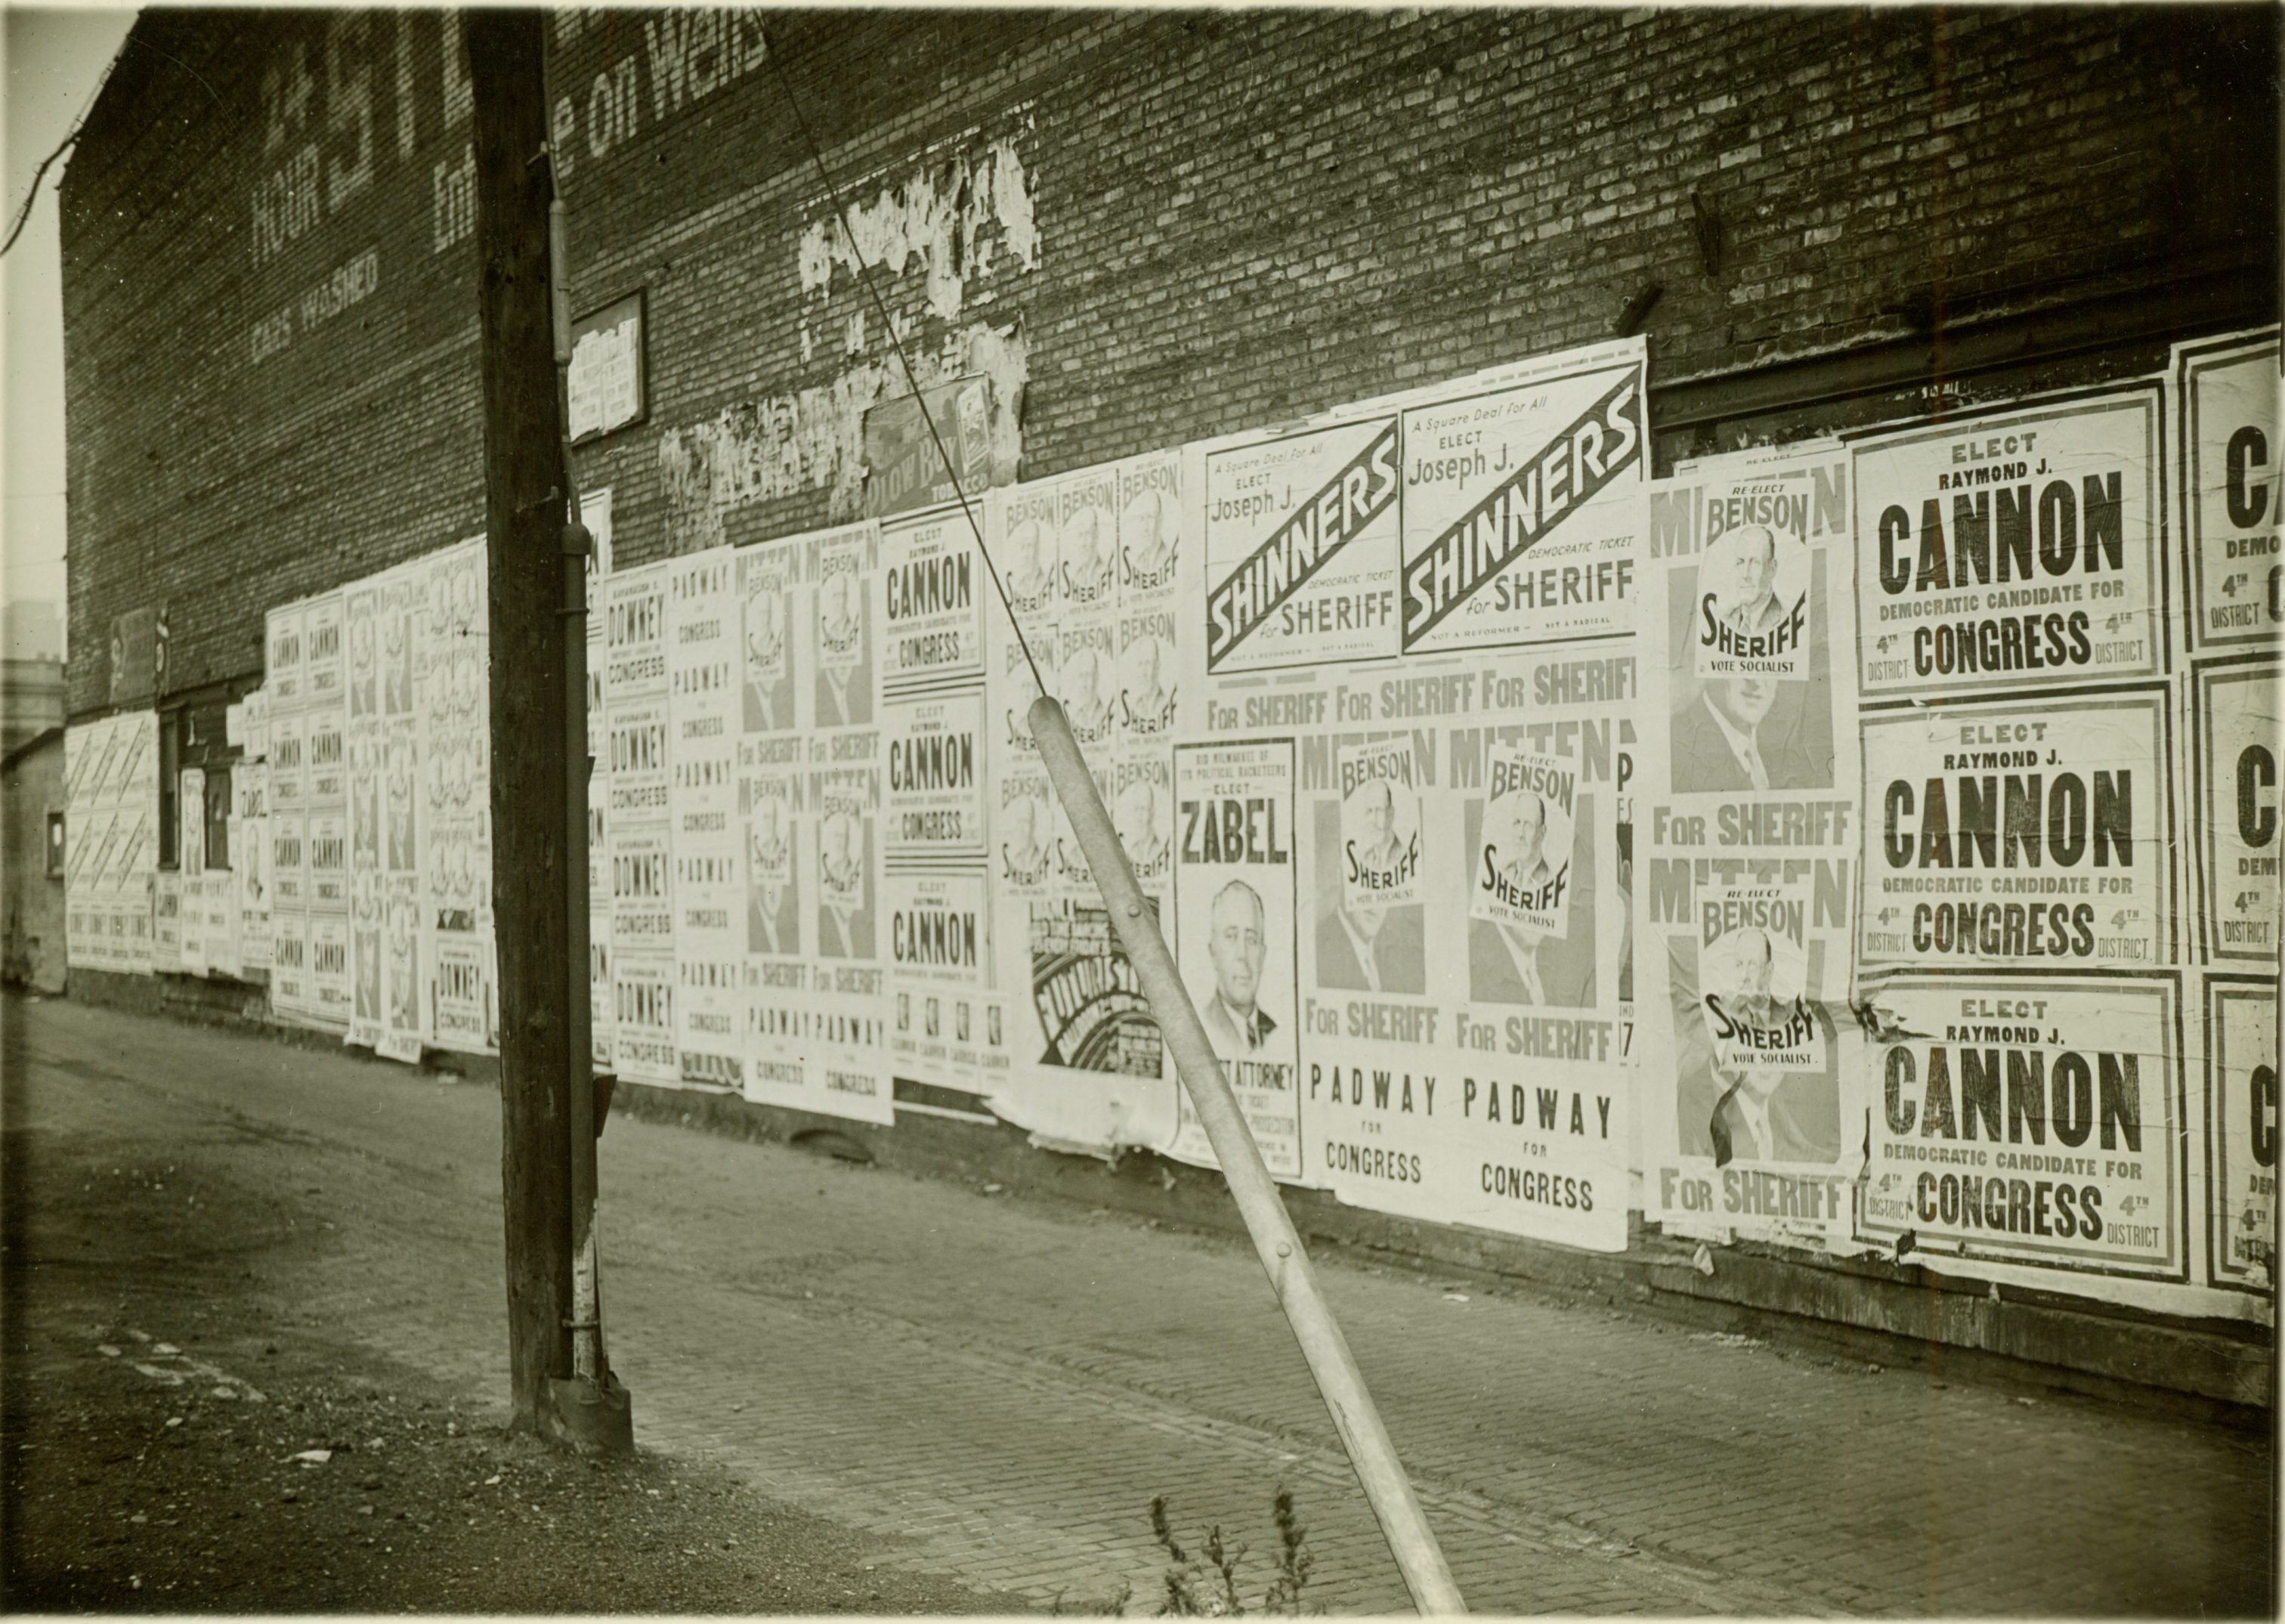 Campaign posters cover this brick wall on Wells Street in 1932. Candidates include Benson for Sheriff, Joseph Shinners for Sheriff, Raymond Cannon for Congress, and Zabel for District Attorney.